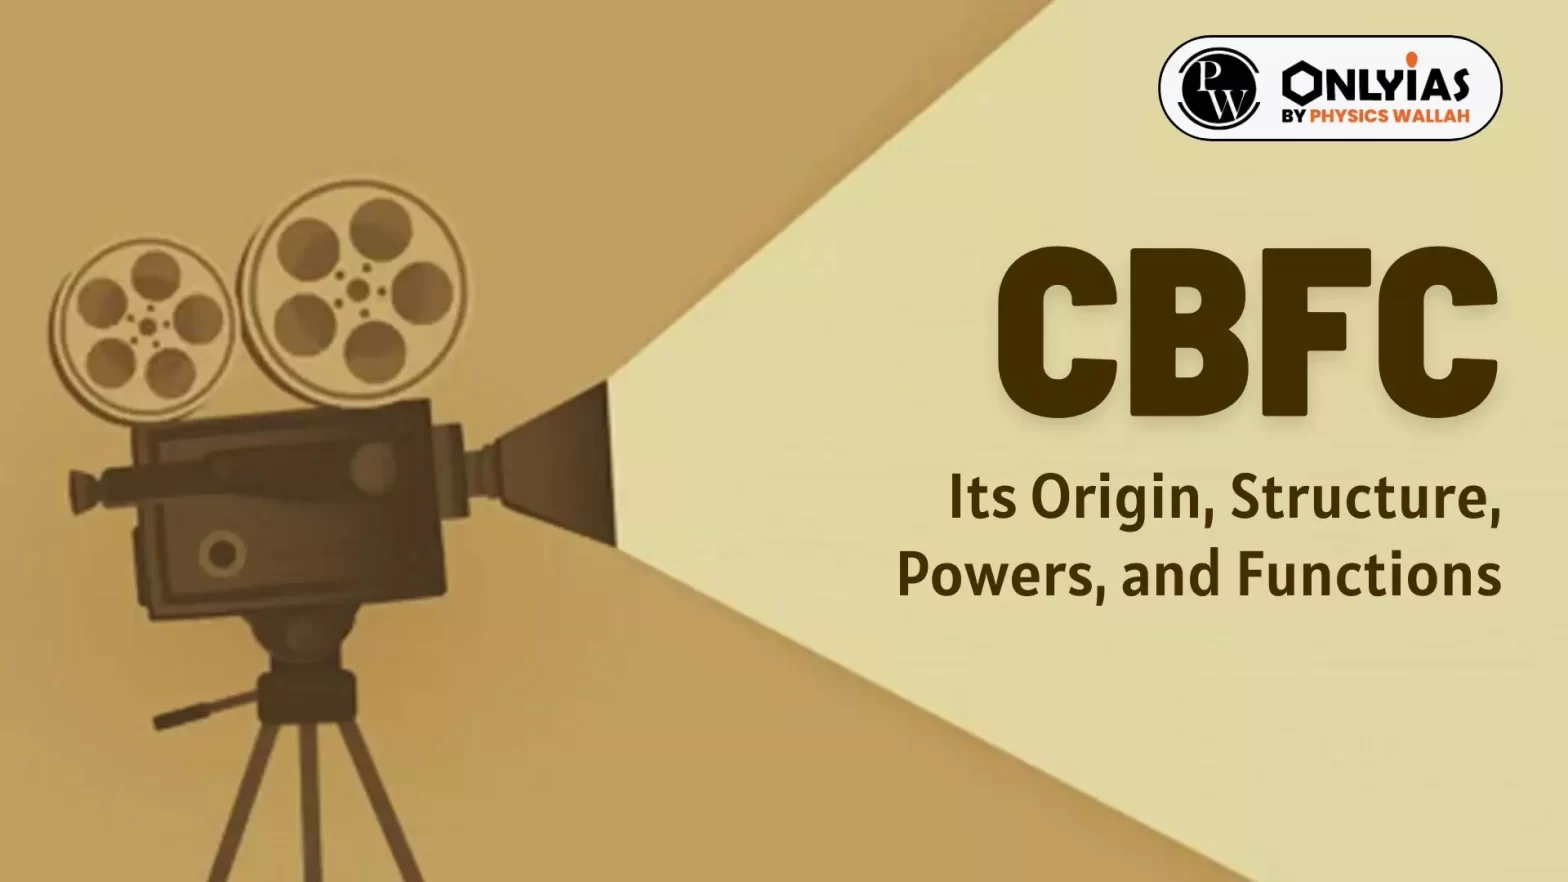 CBFC: Its Origin, Structure, Powers, and Functions